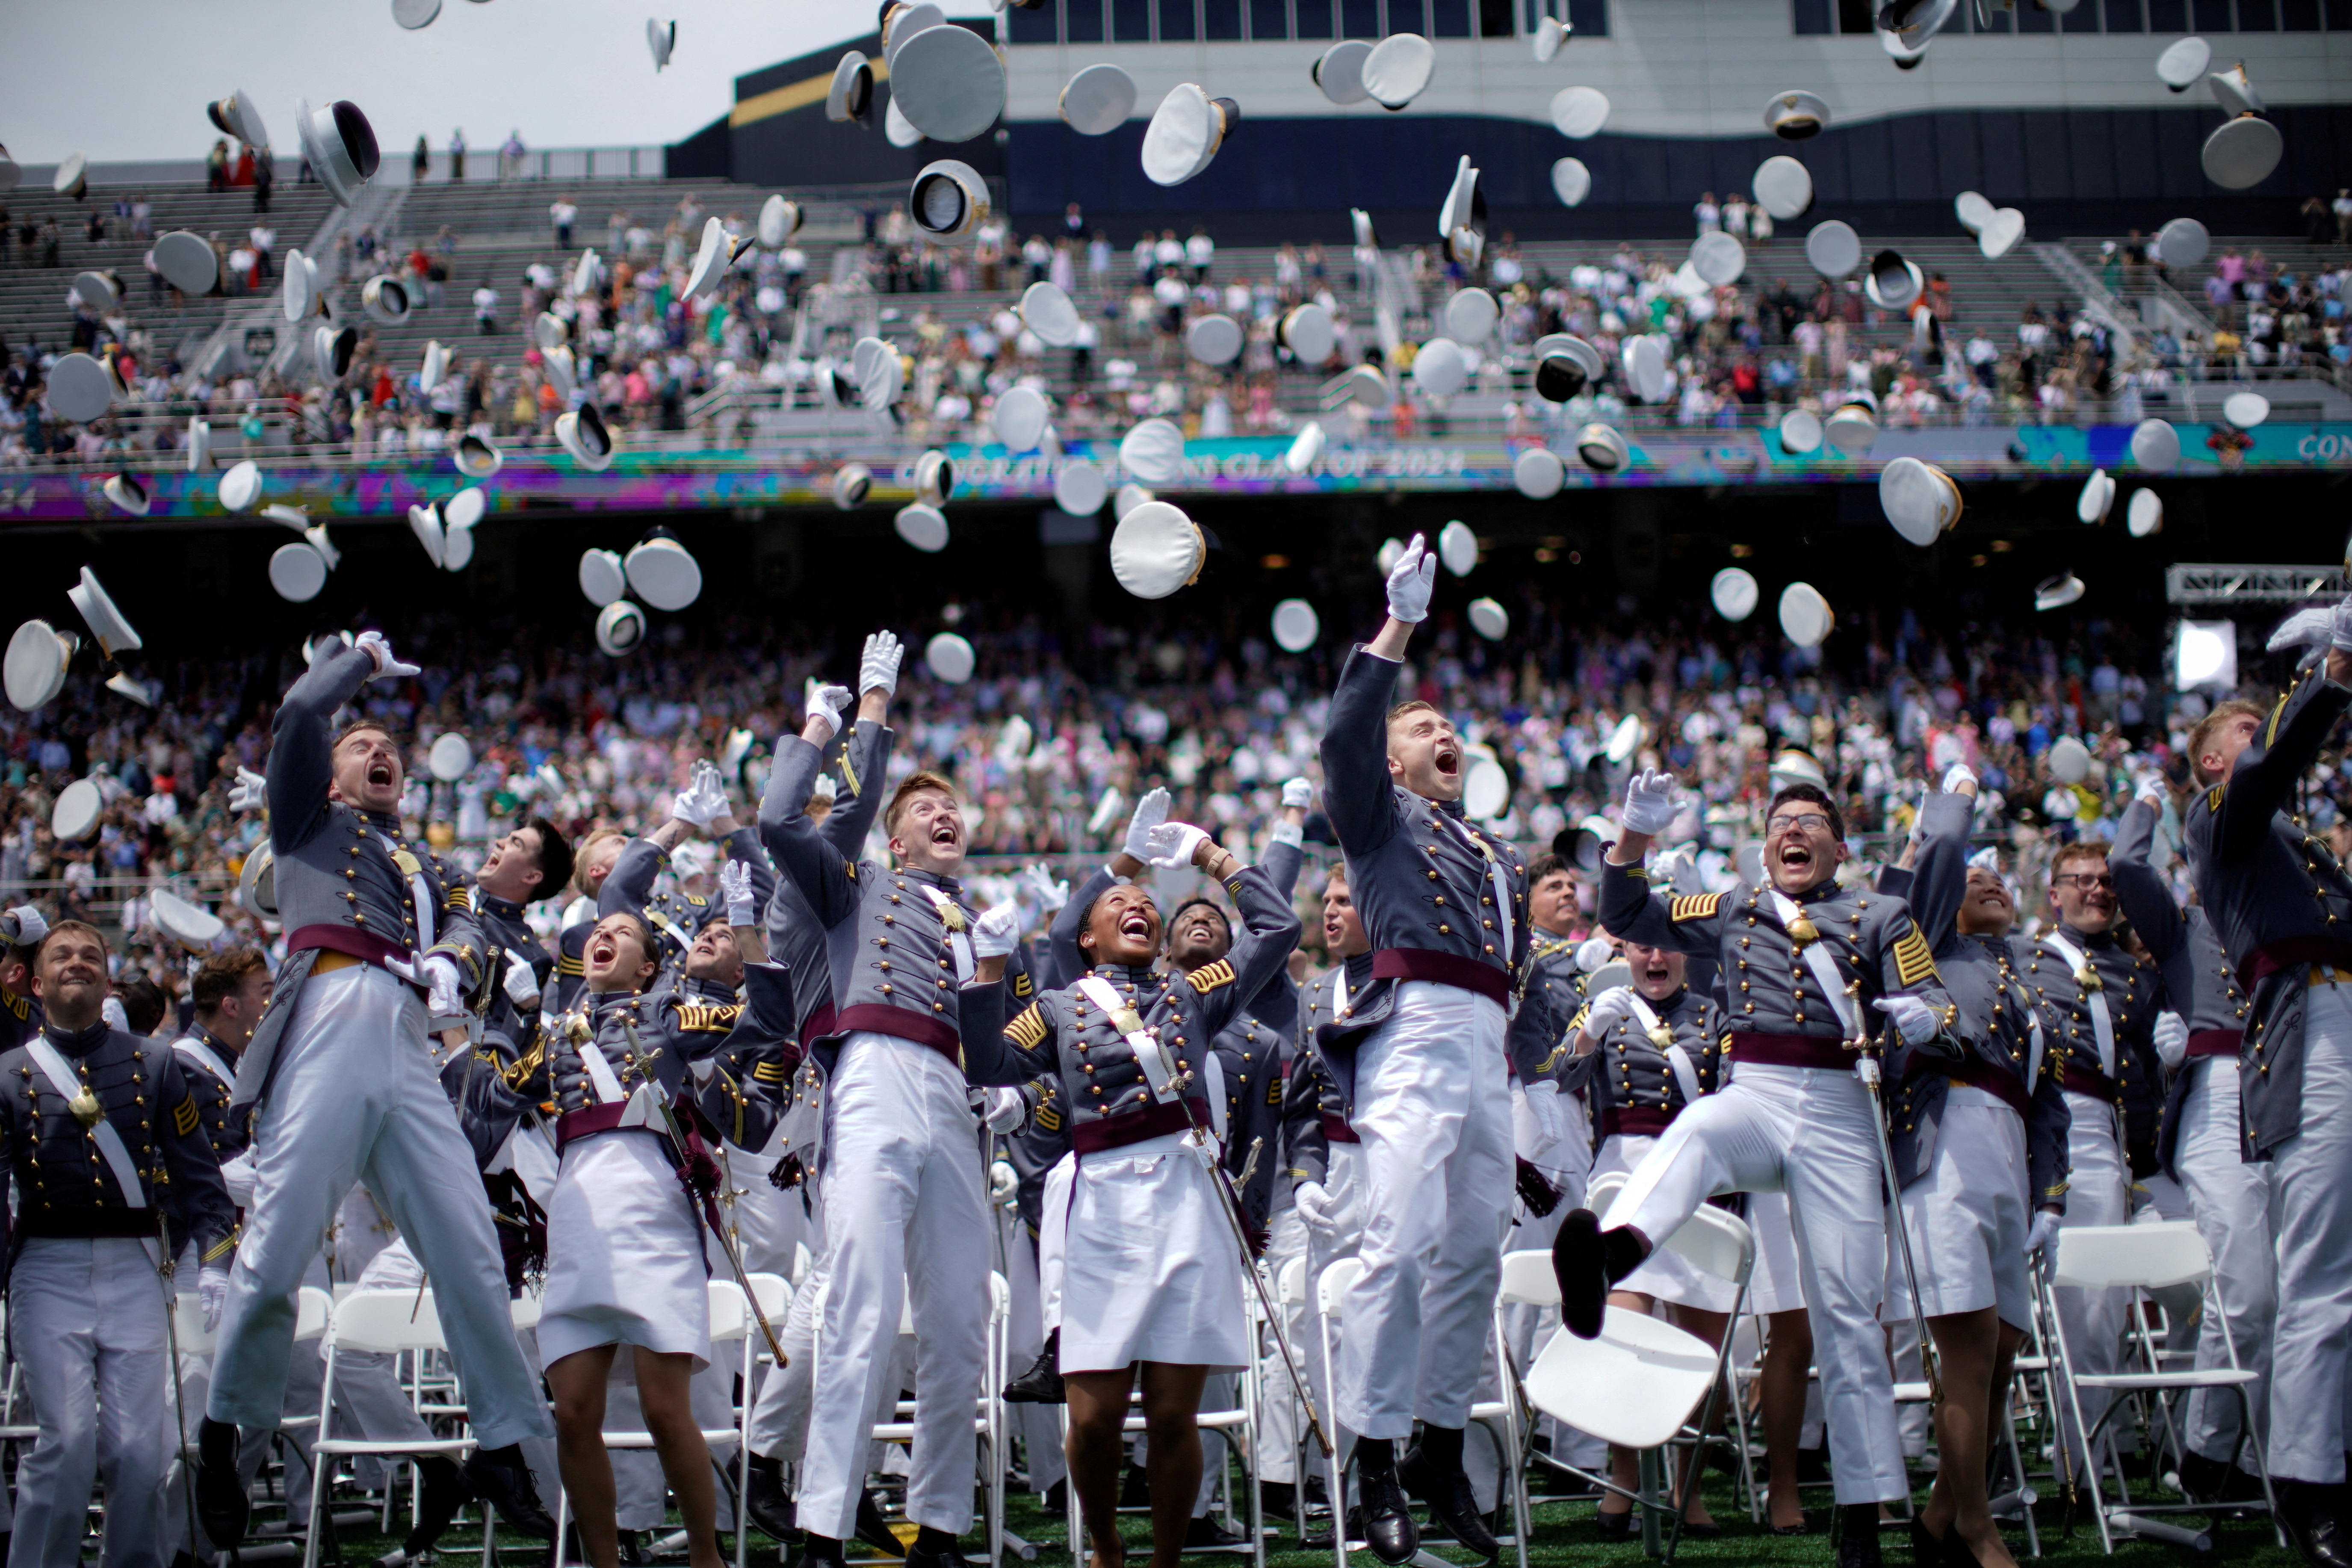 U.S. President Biden speaks at United States Military Academy commencement, in West Point